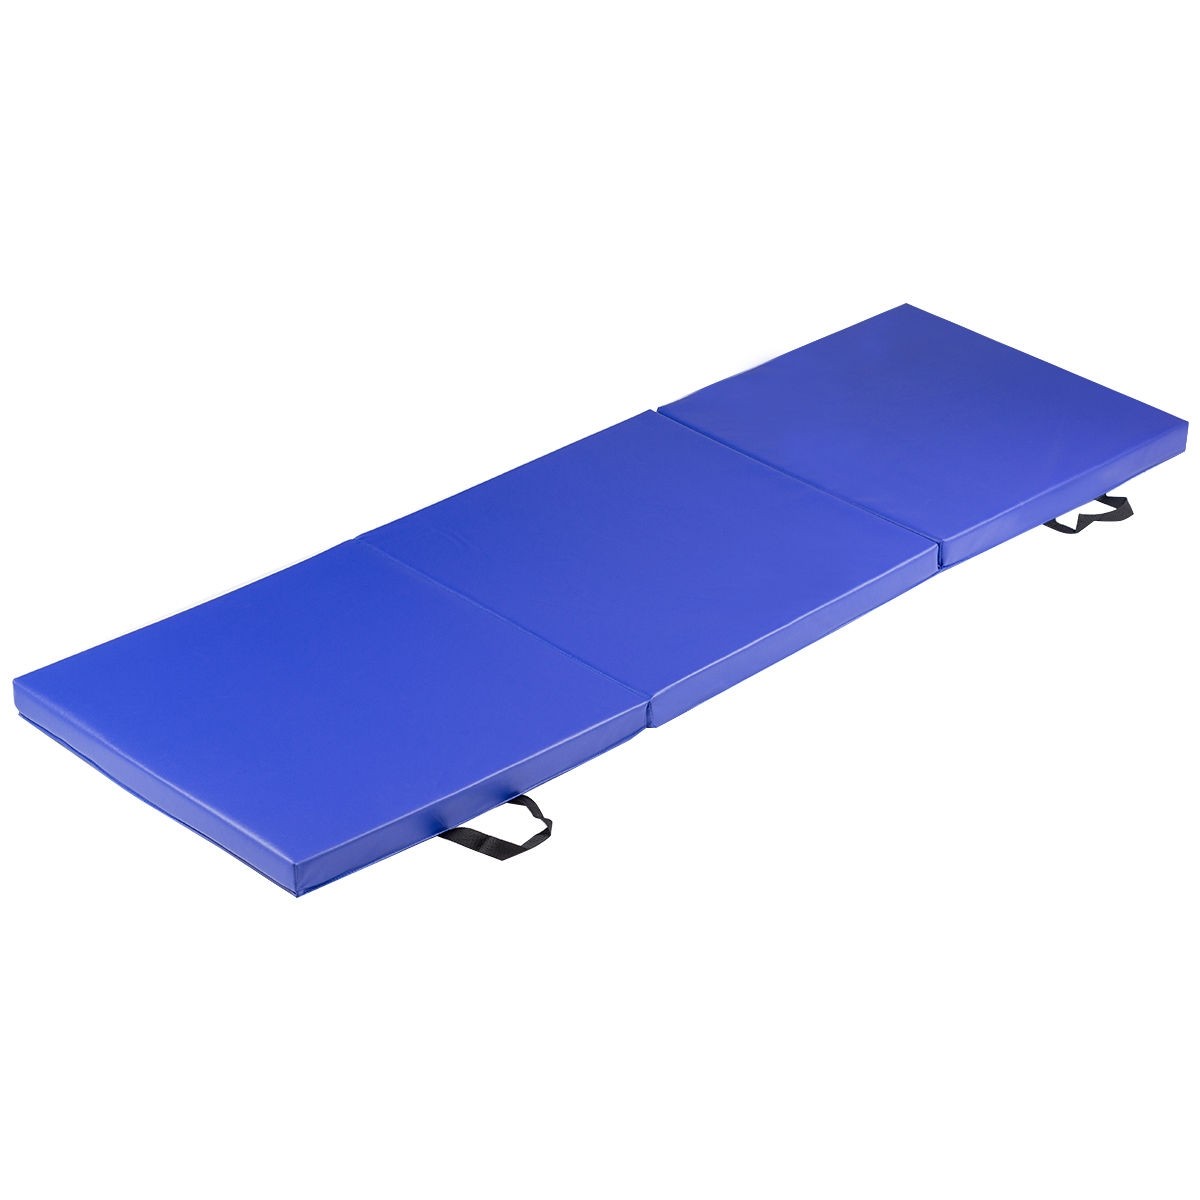 6 Ft. x 2 Ft. Tri-Fold Exercise Gymnastics Mat With Carrying Handles